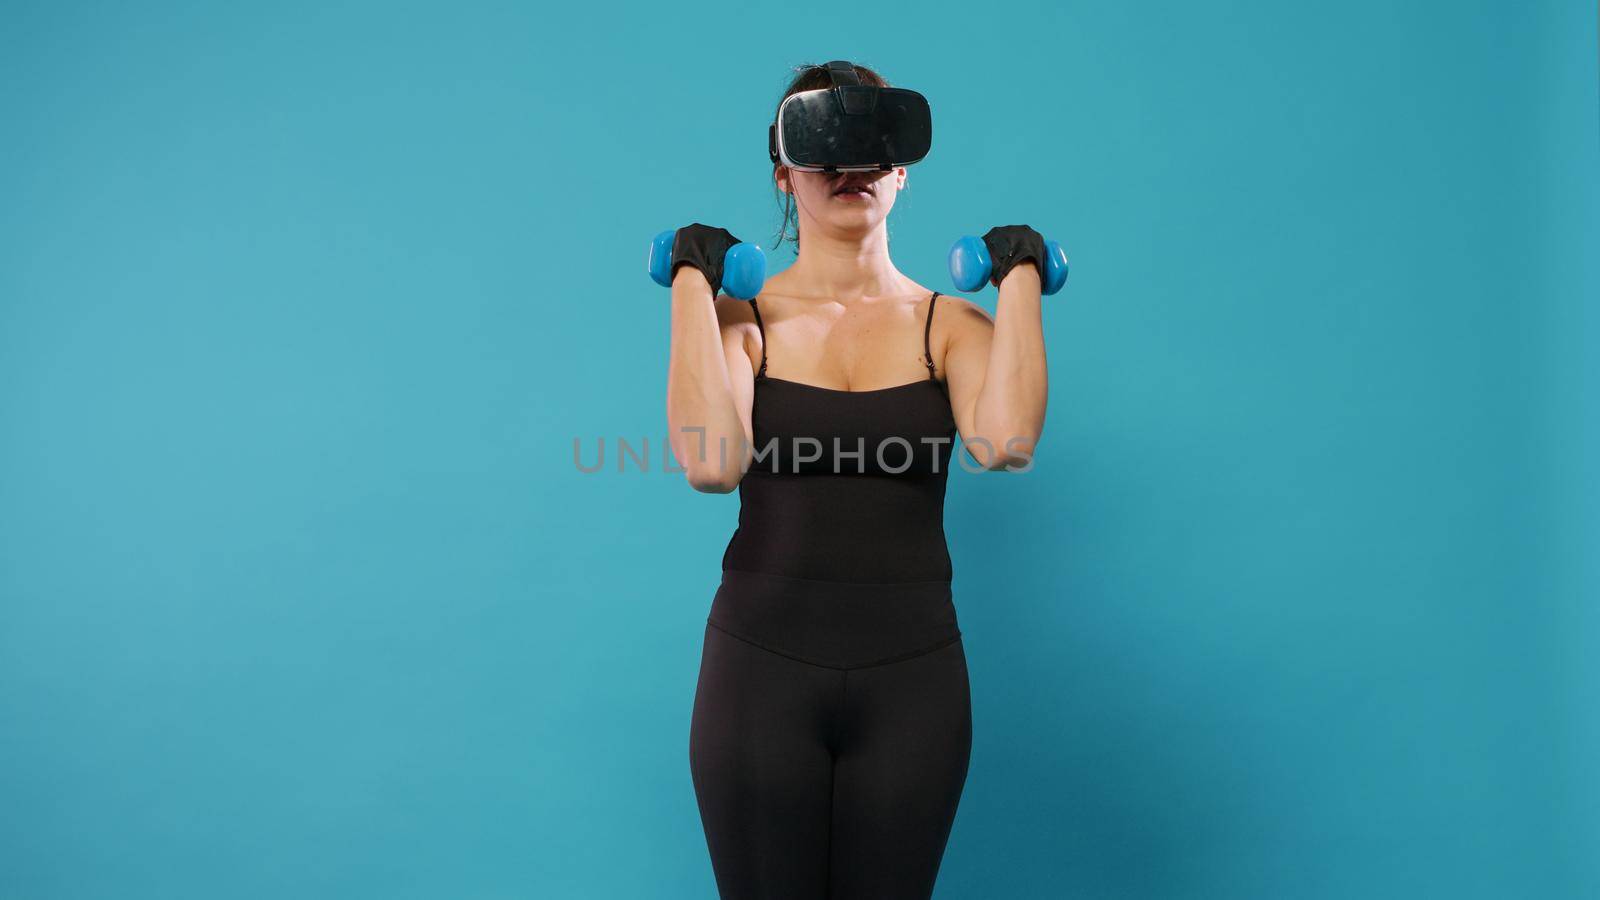 Athlete doing workout training with dumbbells and vr glasses by DCStudio